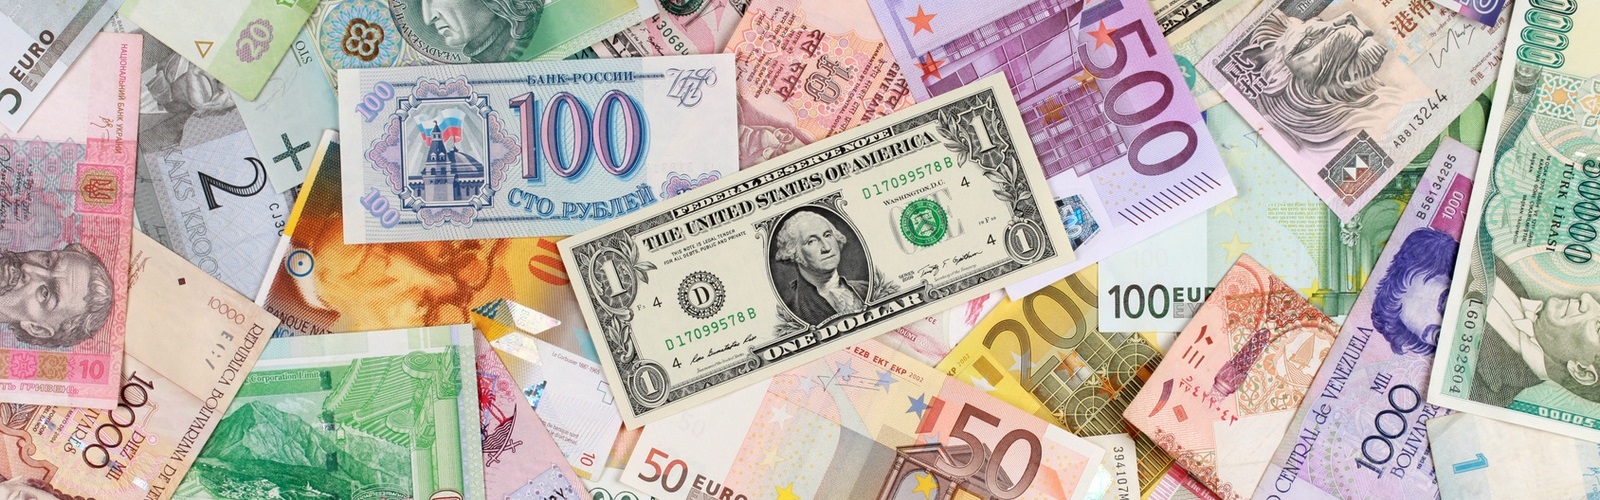 Buy Top 10 Counterfeit Banknotes